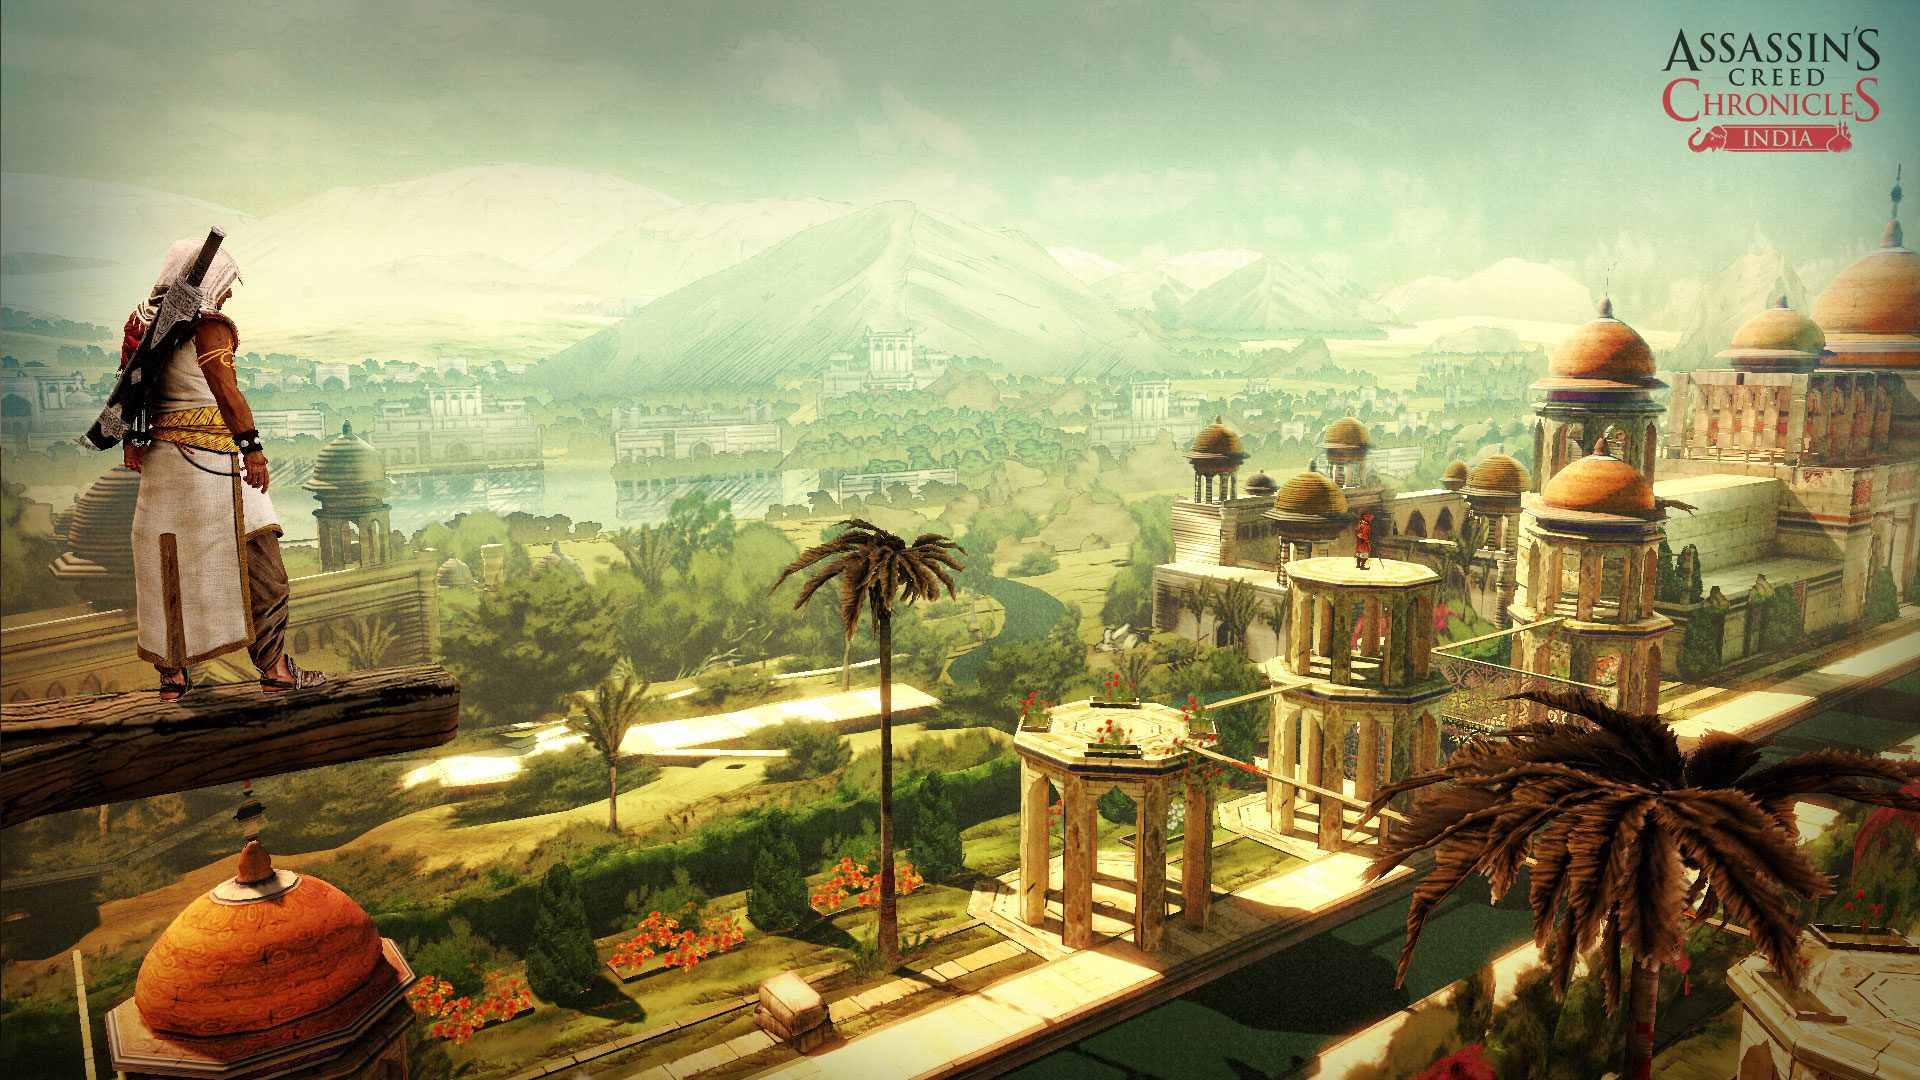 Assassin’s Creed Chronicles: India and Crazy Taxi are now free through Games with Gold